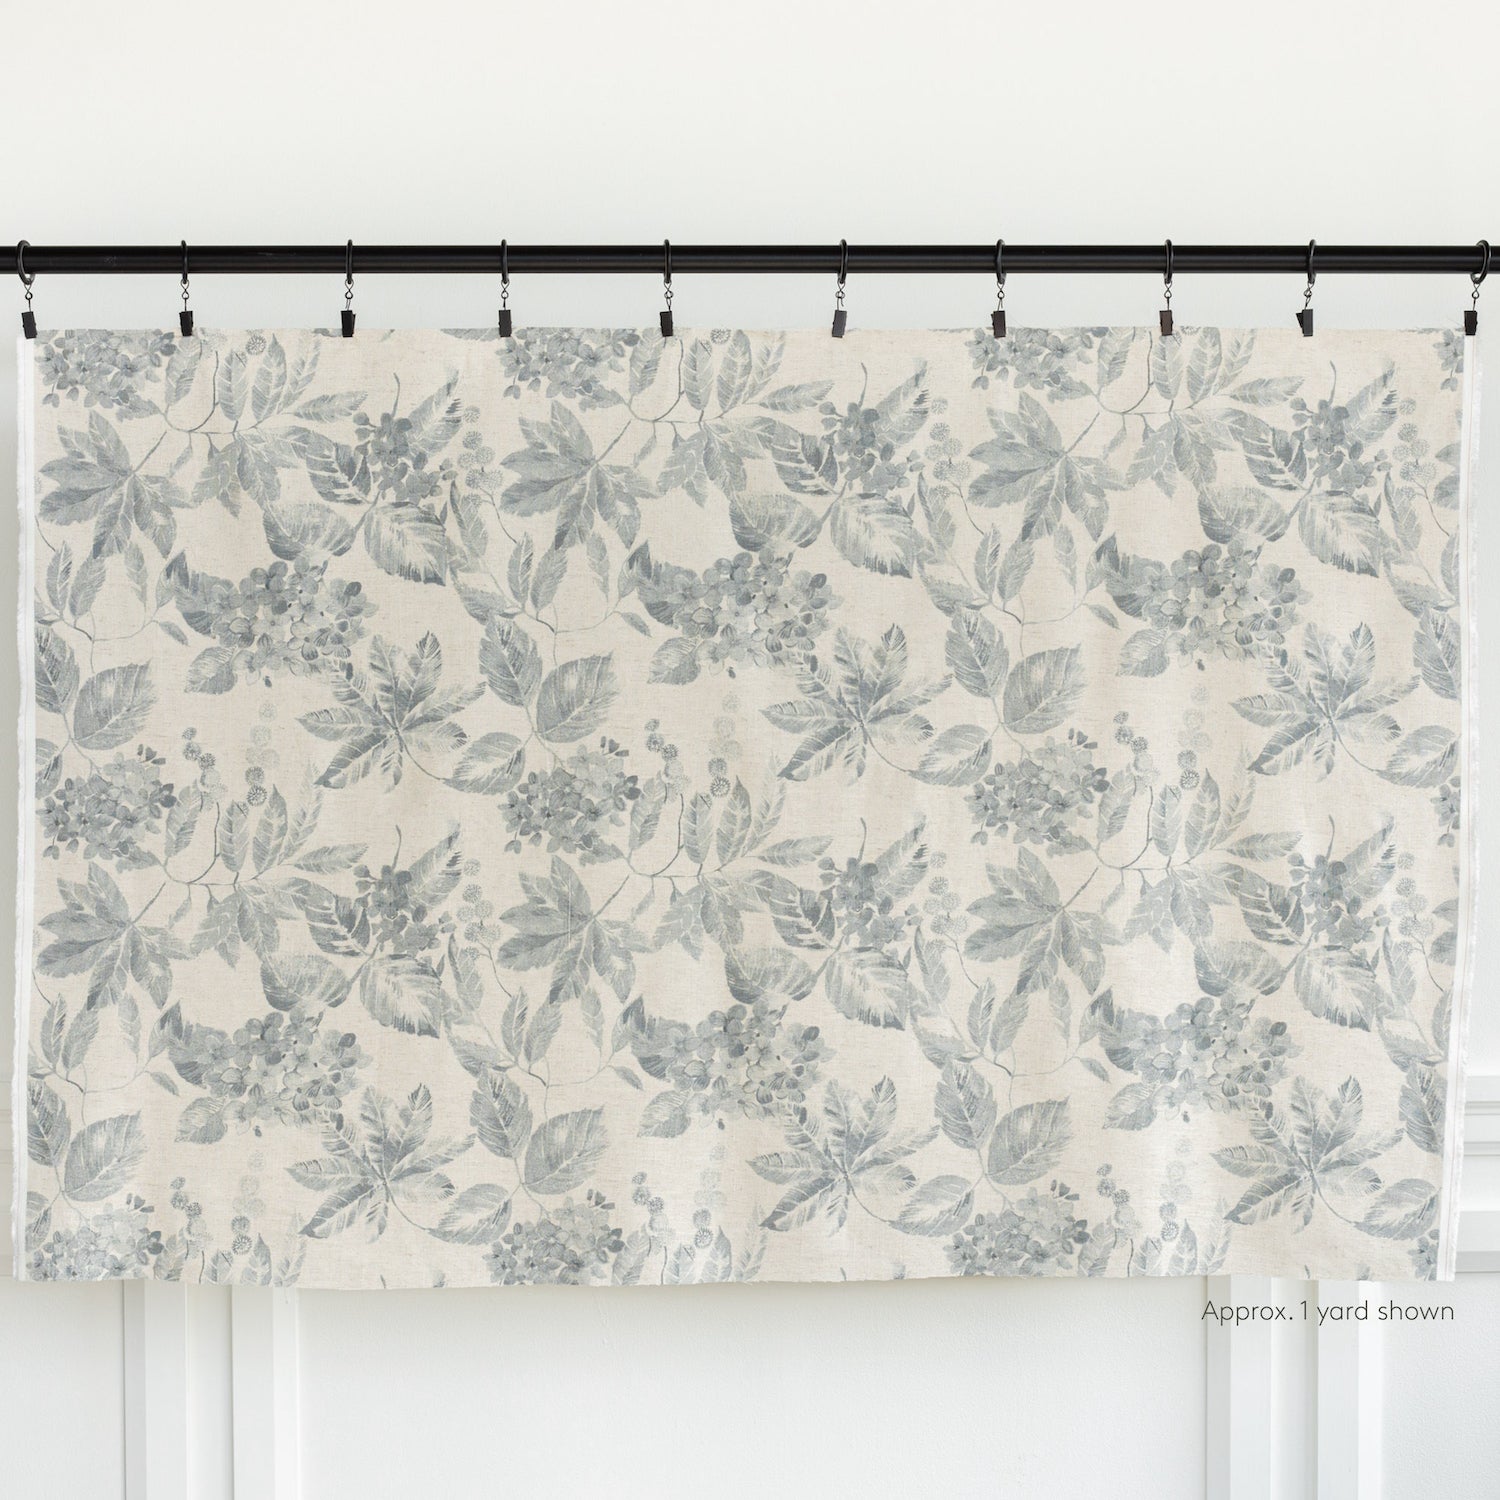 an oatmeal cream and blue botanical floral pattern print fabric : one yard